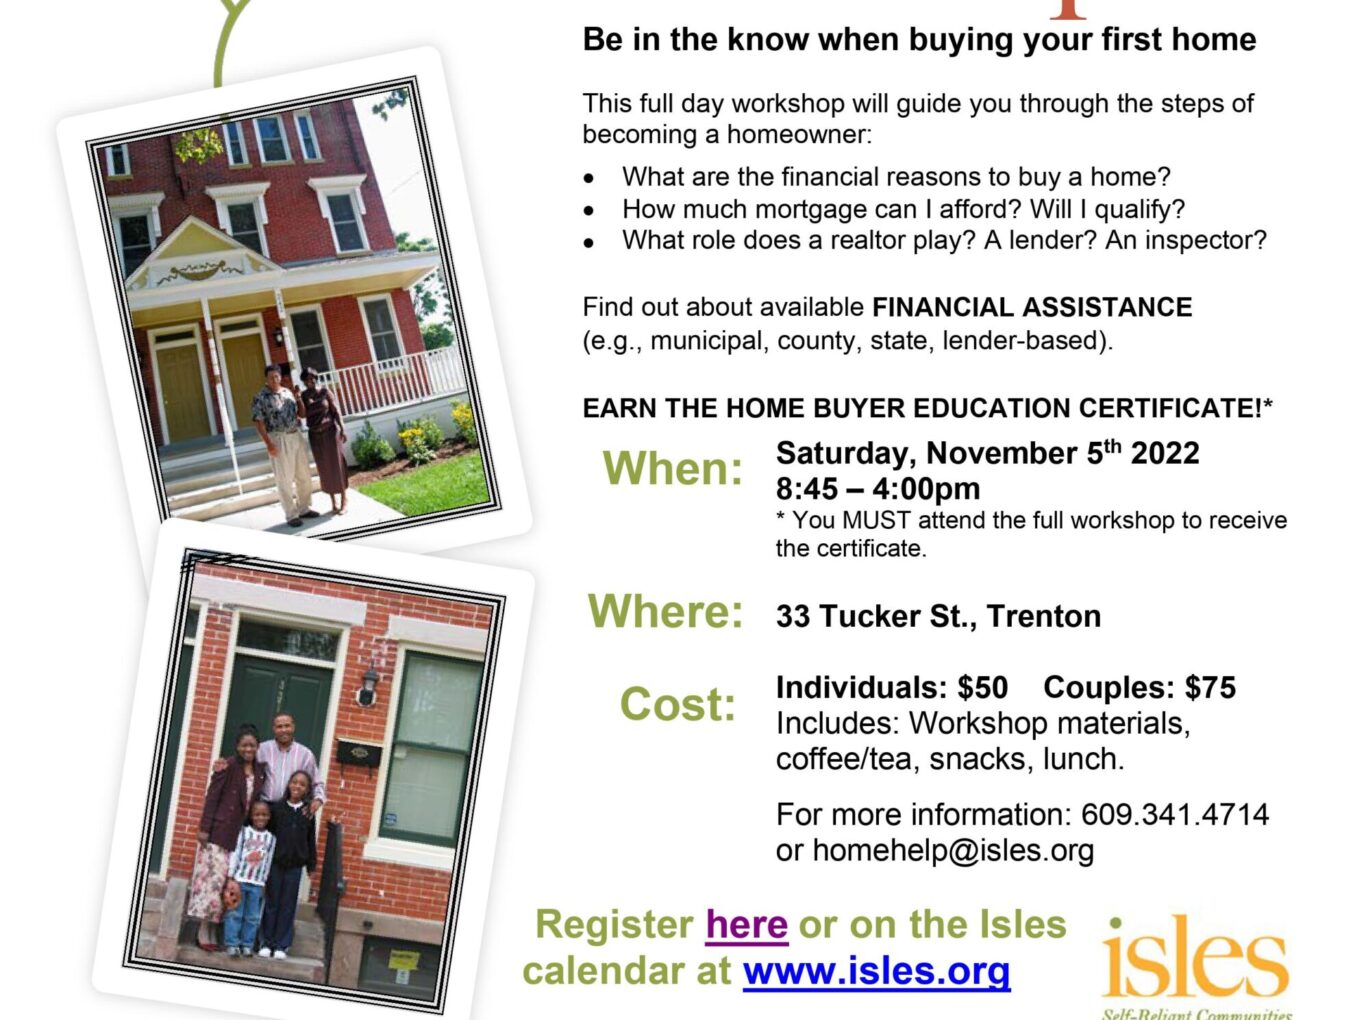 Isles to Host First-Time Homebuyers Workshop on November 5th